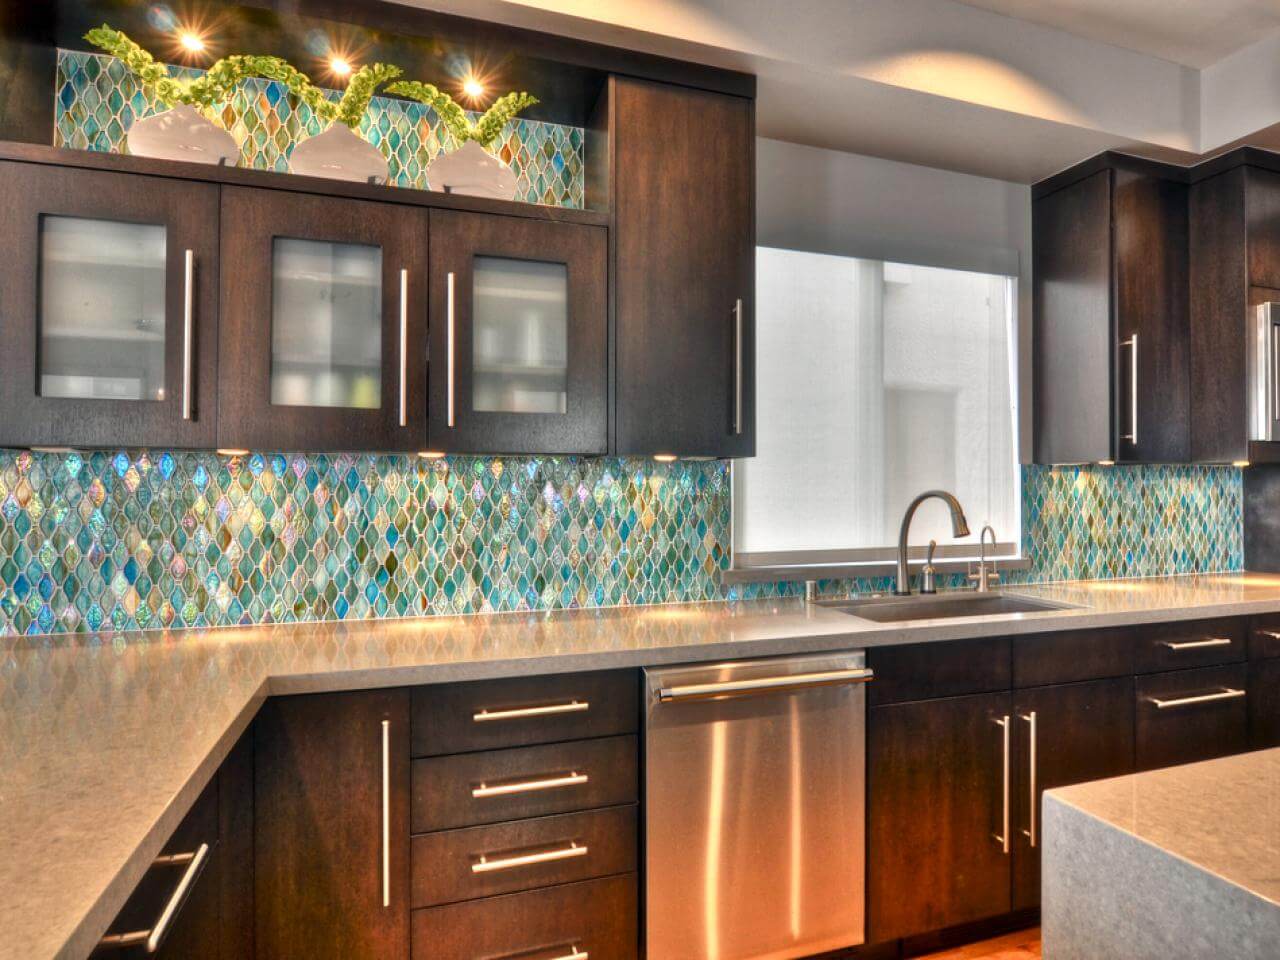 Lively kitchen back wall with mosaic